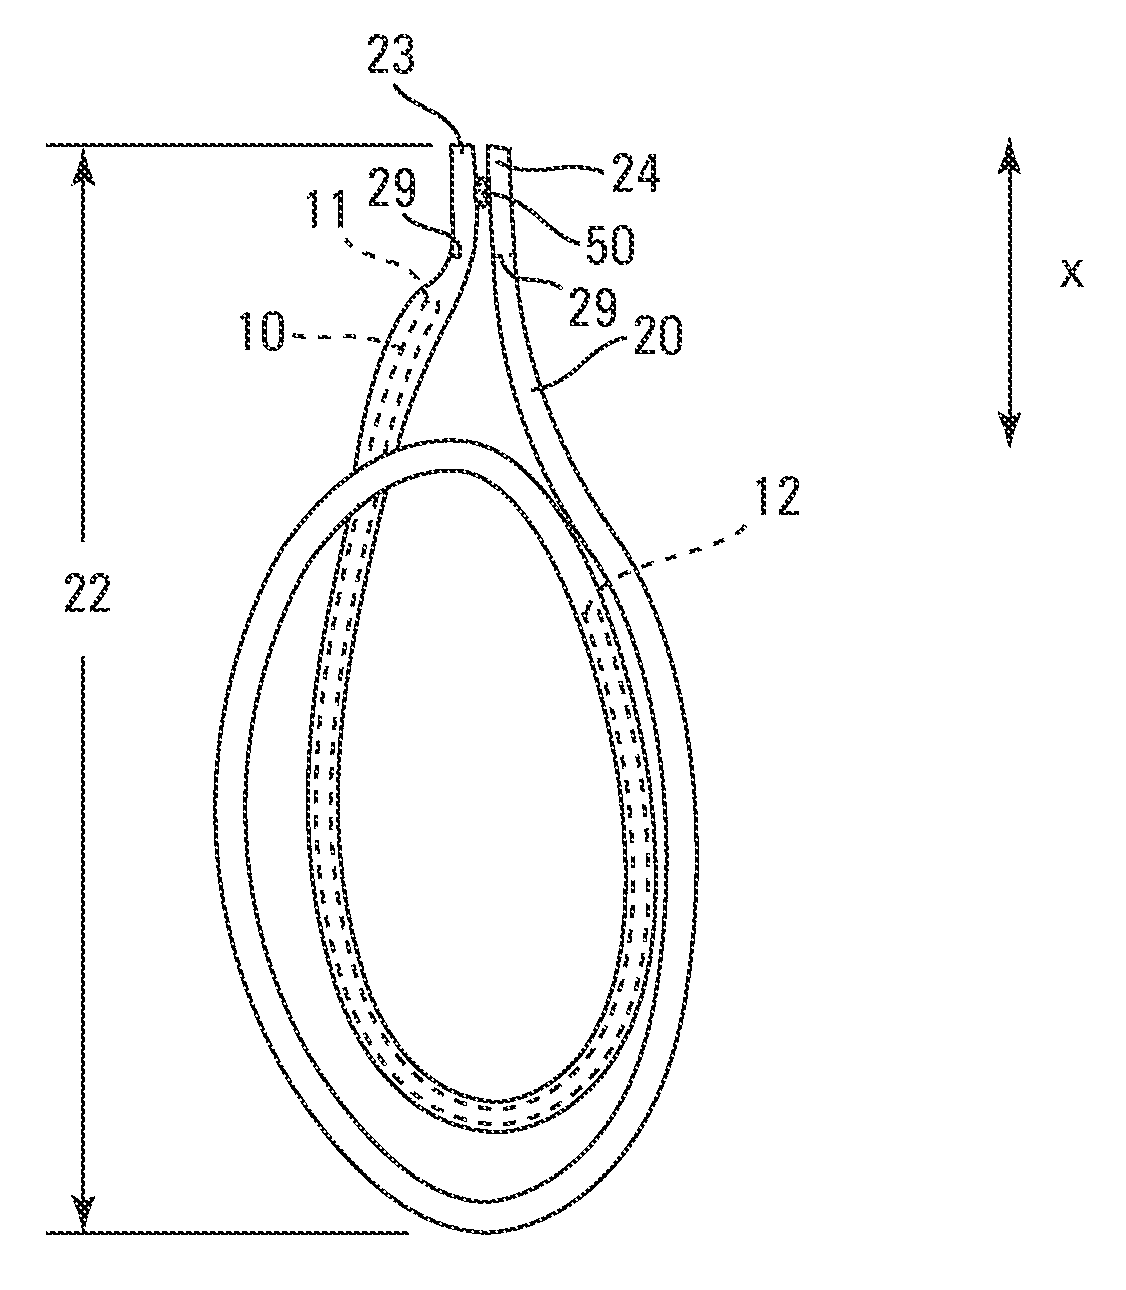 Compact packaged intermittent urinary catheter